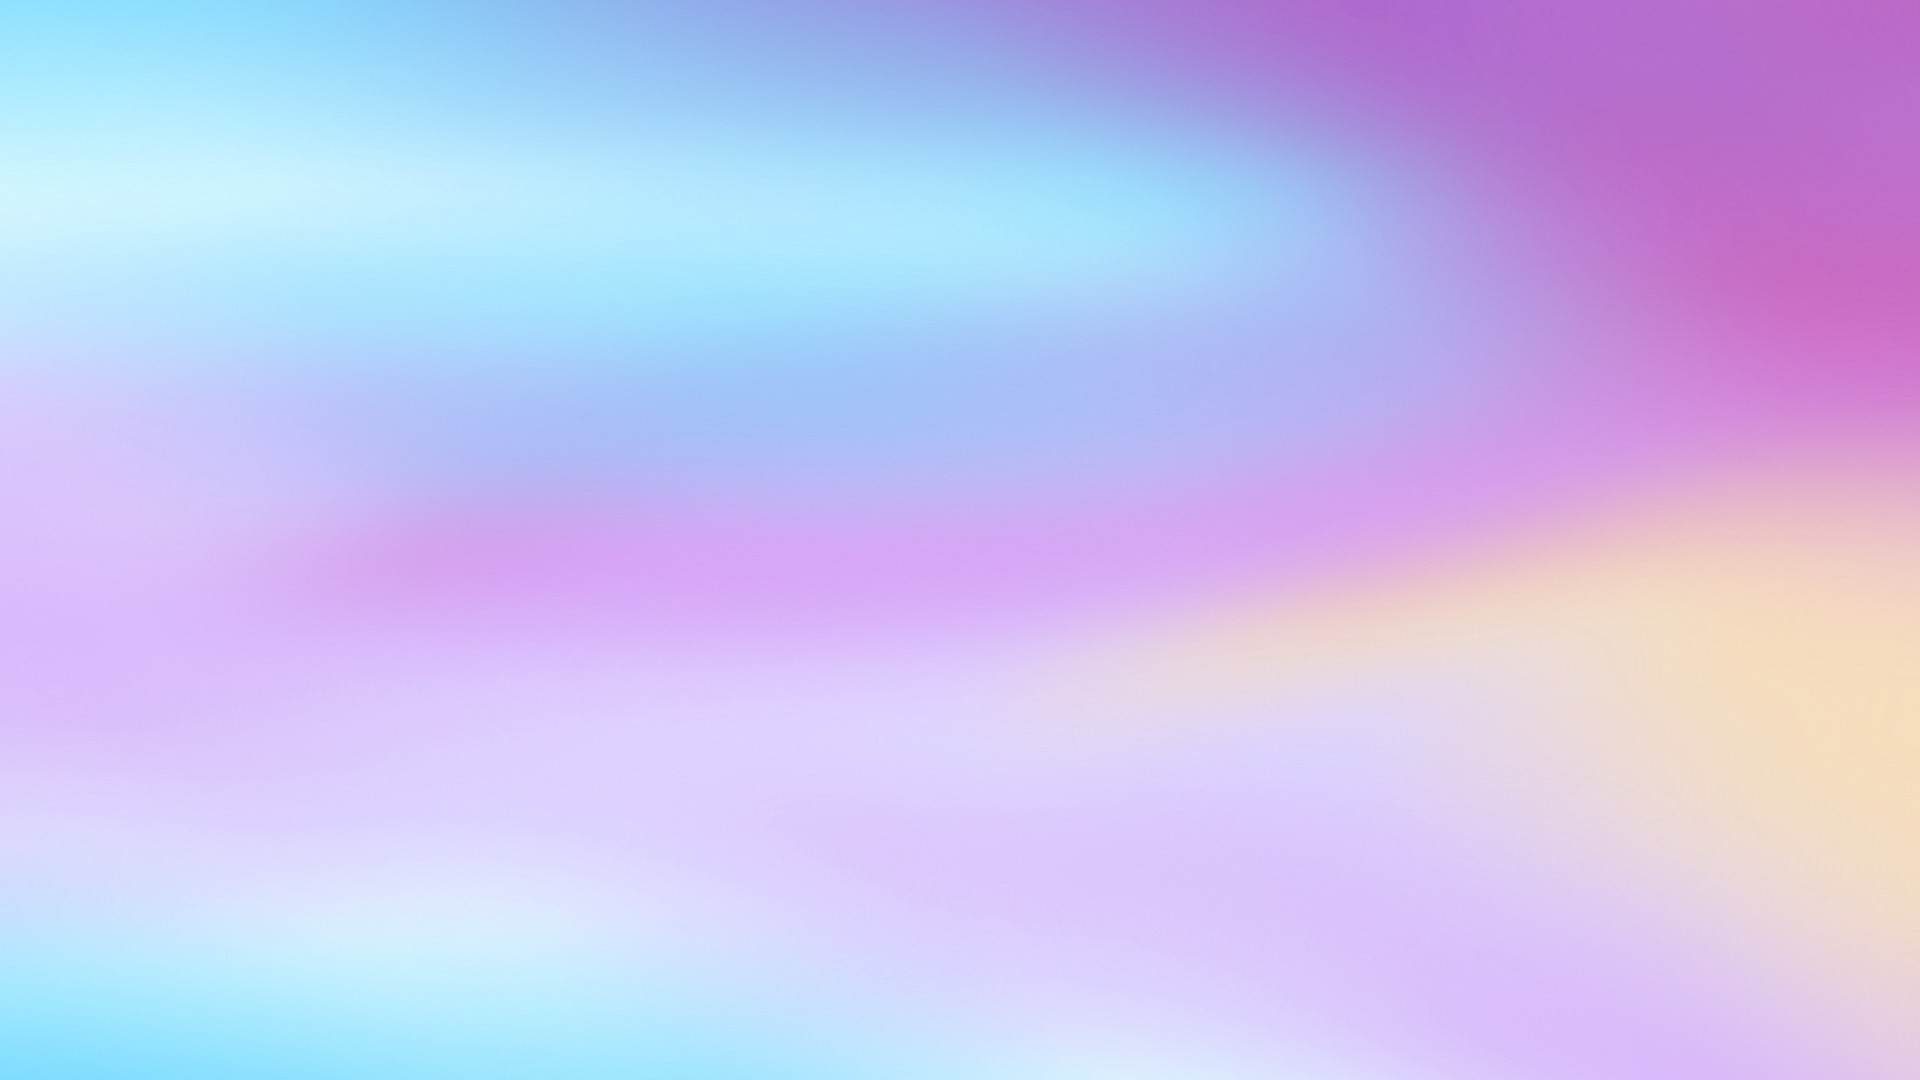 Pastel Wallpaper / Pastel Wallpapers - Wallpaper Cave / Maybe you would